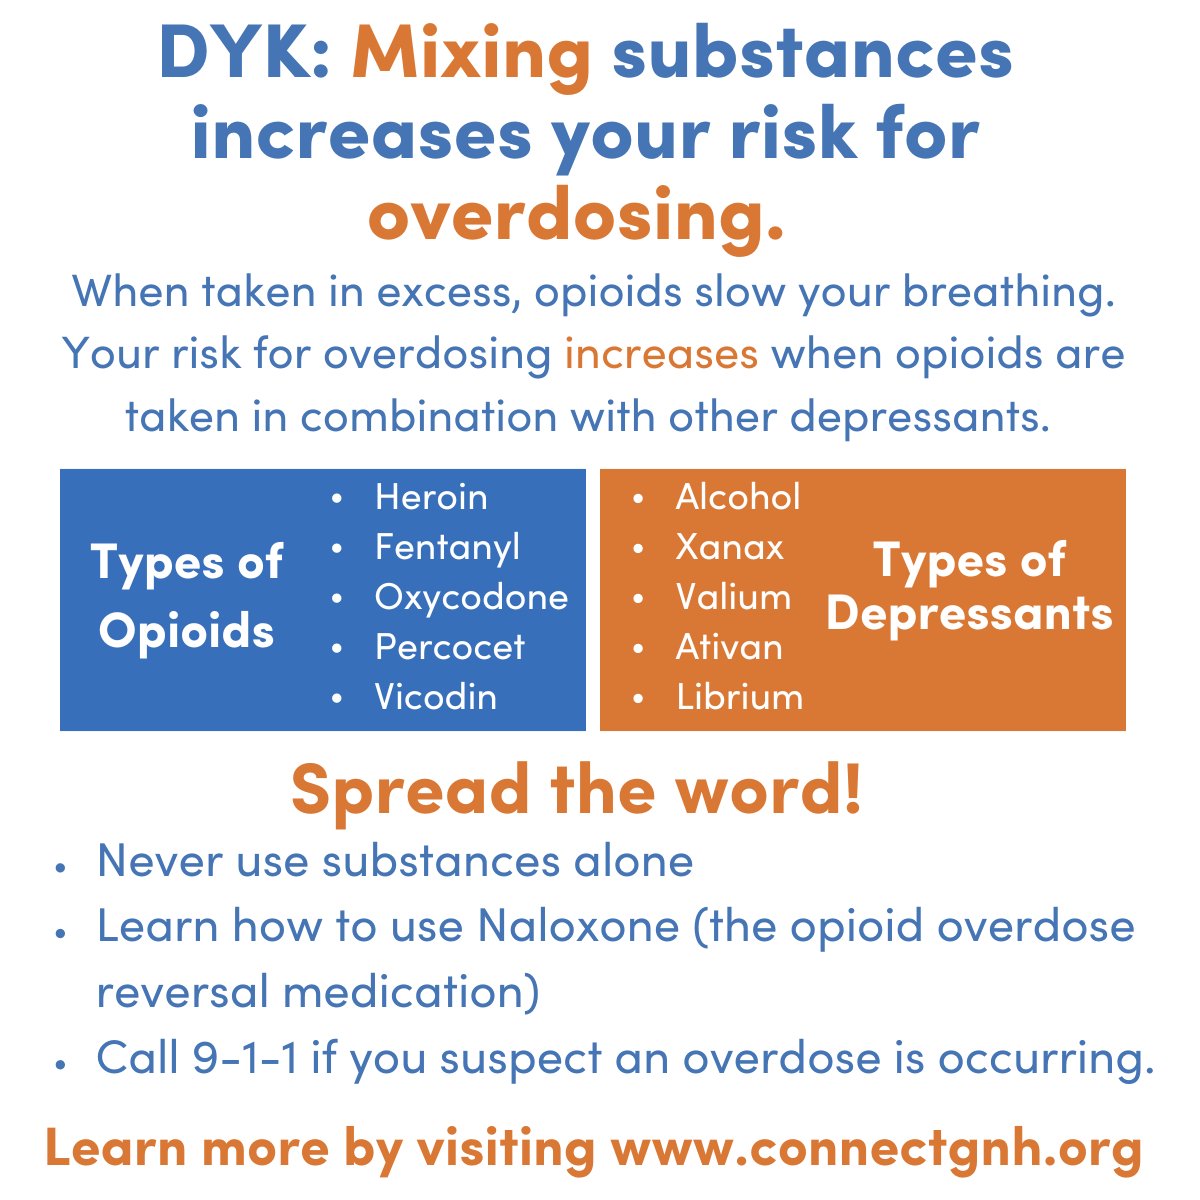 Overdose Prevention is a core component of #NationalPreventionWeek. Polysubstance use, the use of multiple substances at once, significantly increases your risk of overdose. Stay informed, carry Naloxone, and educate those around you #NationalPreventionWeek.